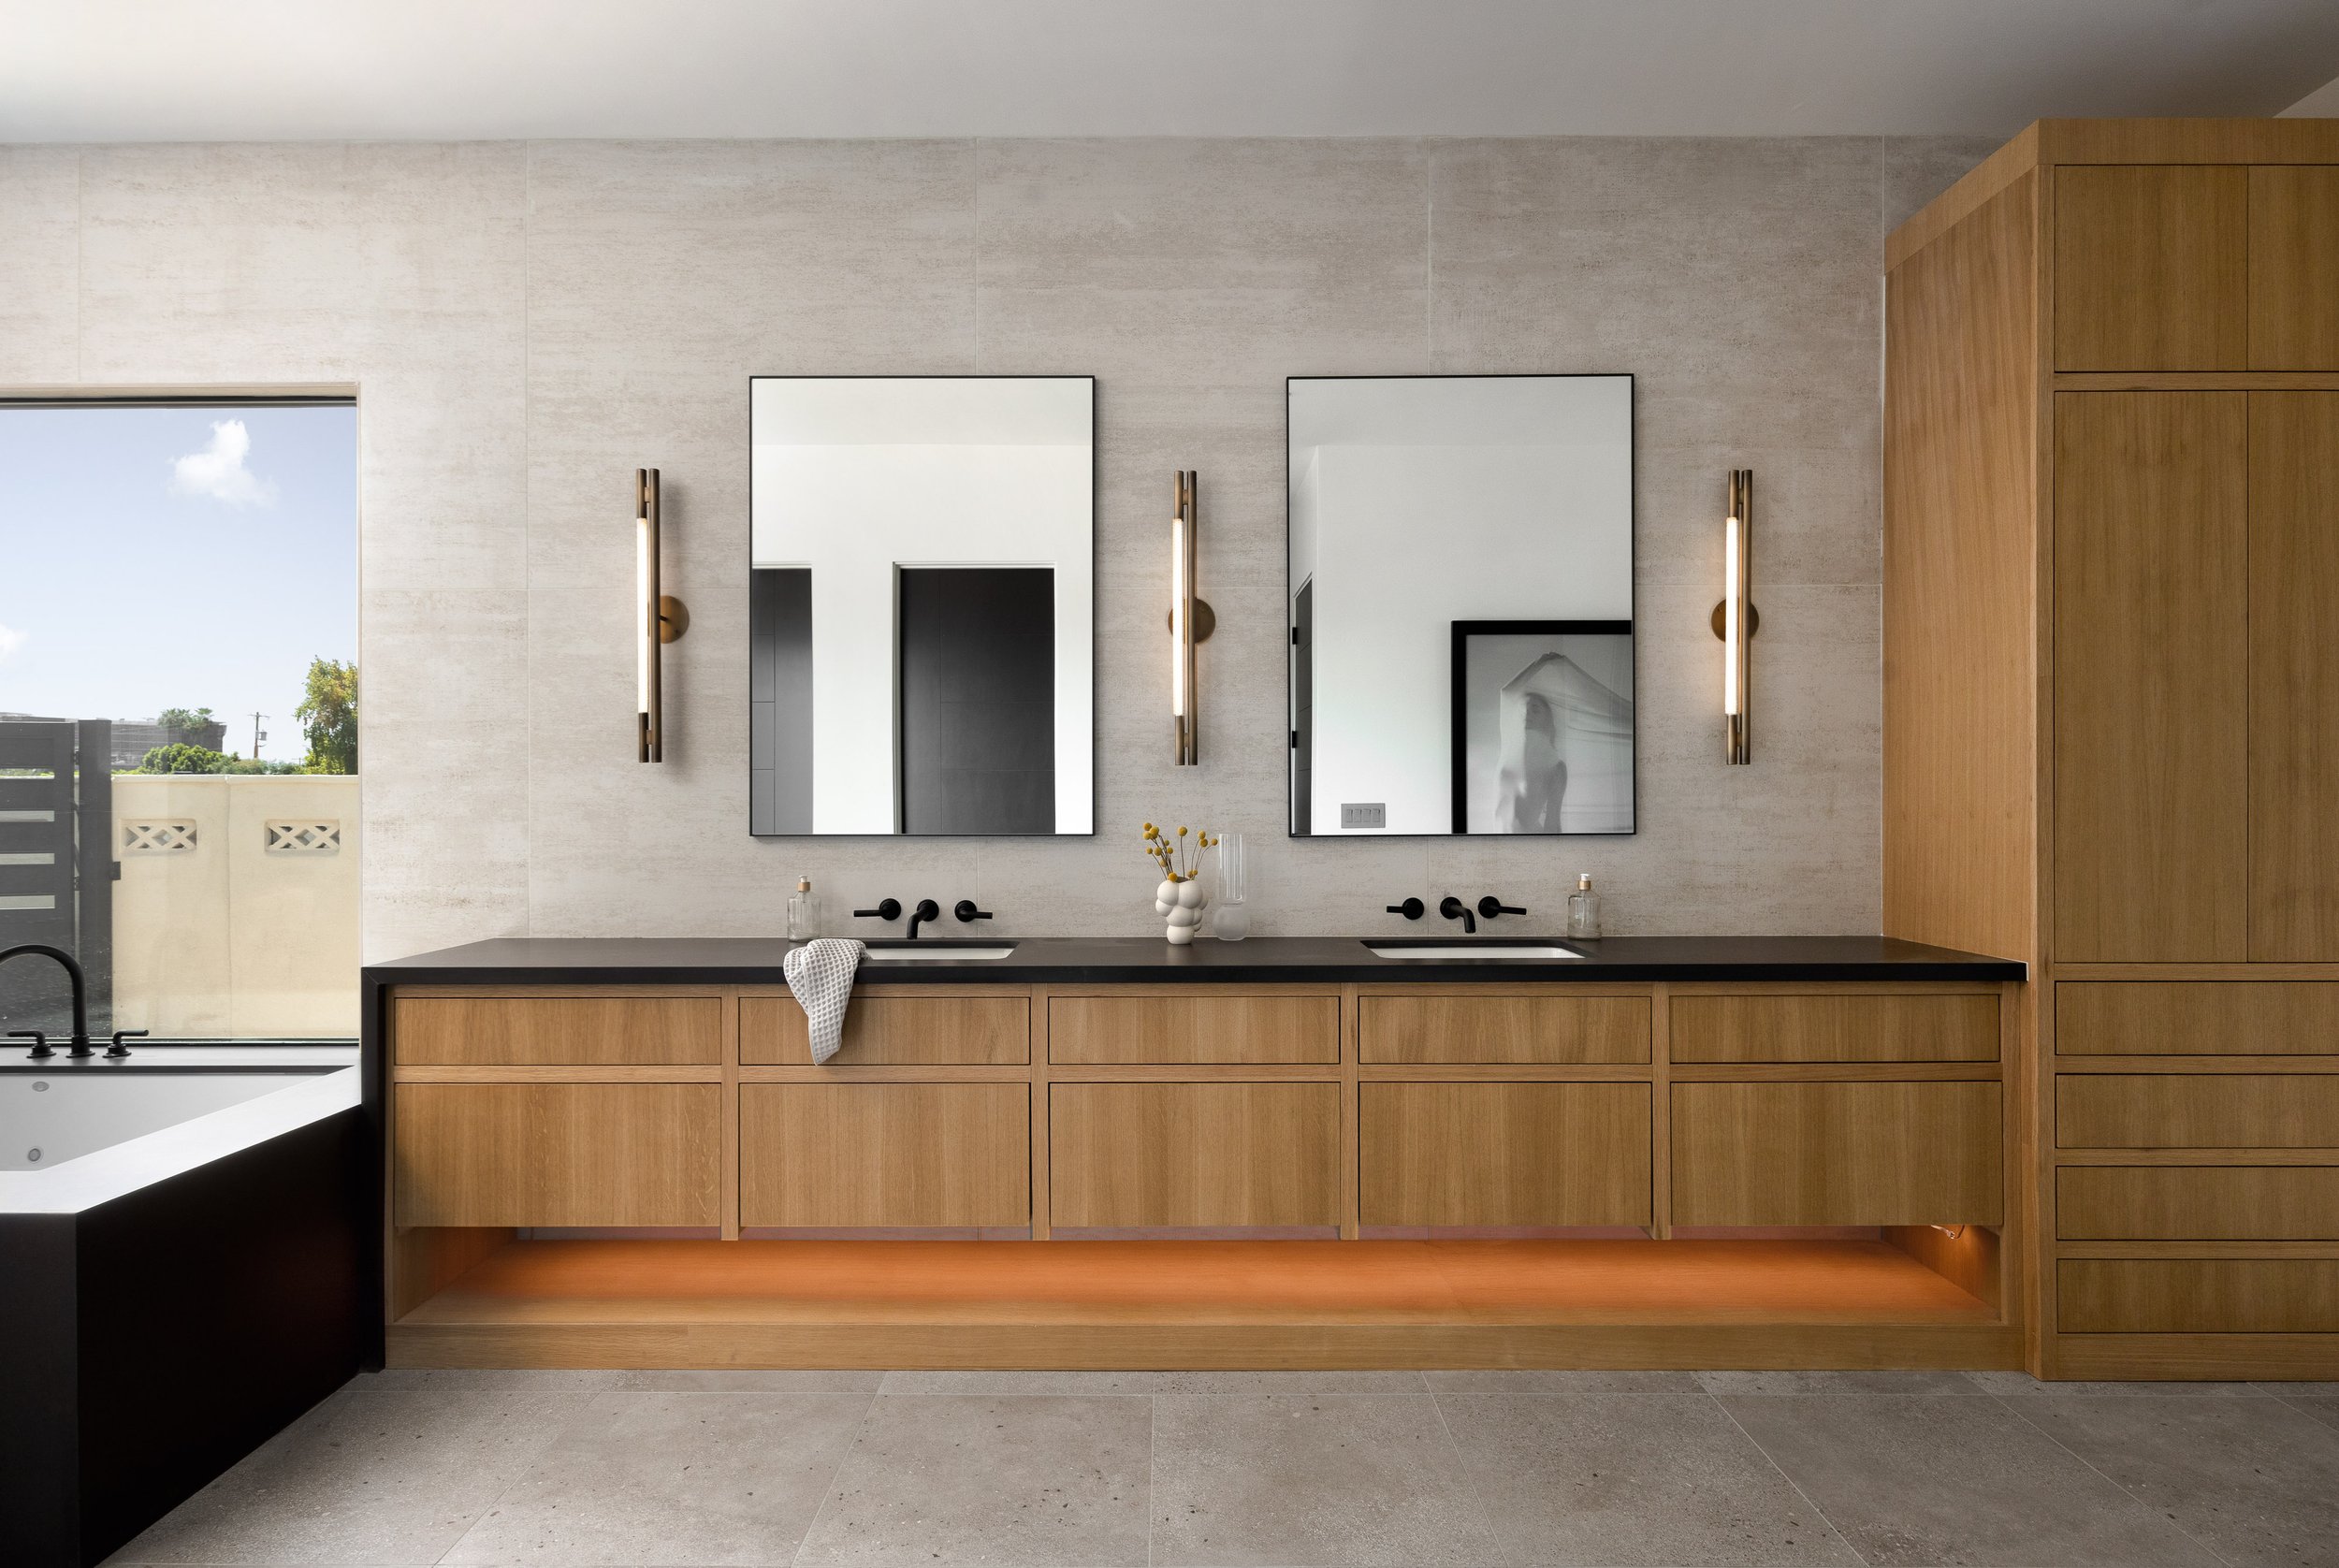  Minimal shape, maximum appeal. Three  Leto Sconces  featured in this modern bathroom designed by Kaitlyn Wolfe and photographed by Kevin Brost. 